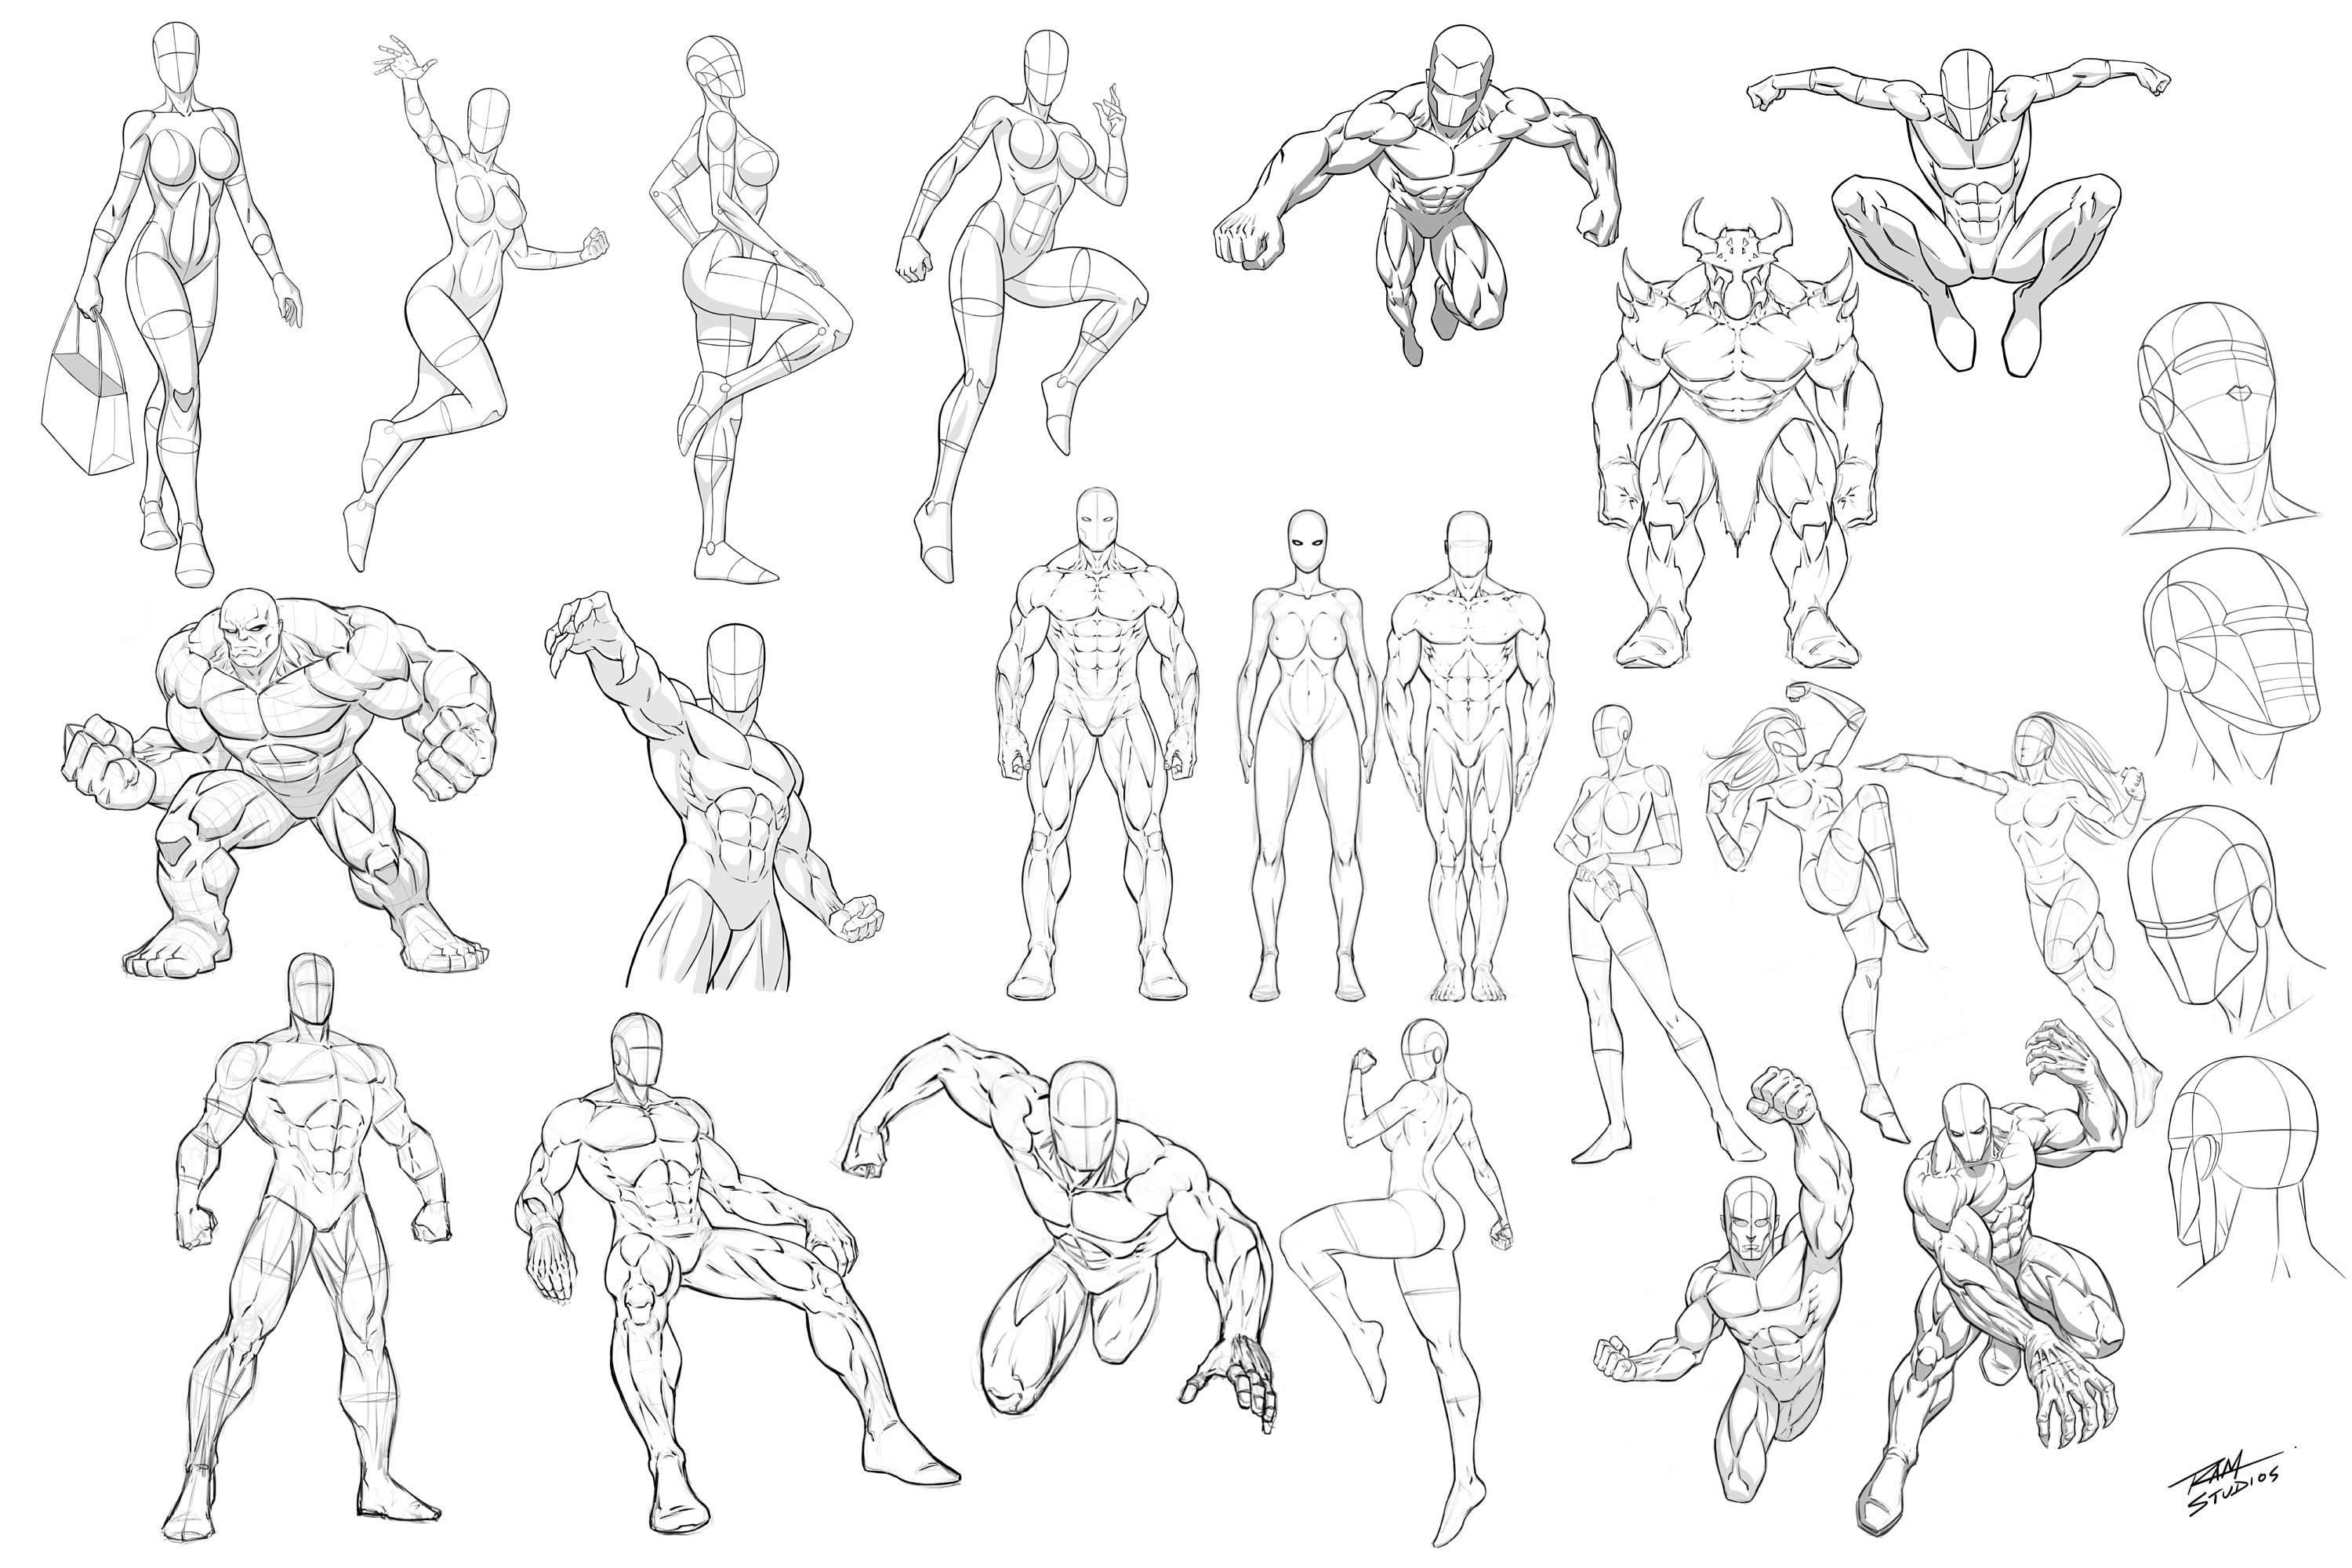 Poses for Artists - New pose reference! All are free to use for your art,  commercial or otherwise! www.PoseMuse.com | Фејсбук